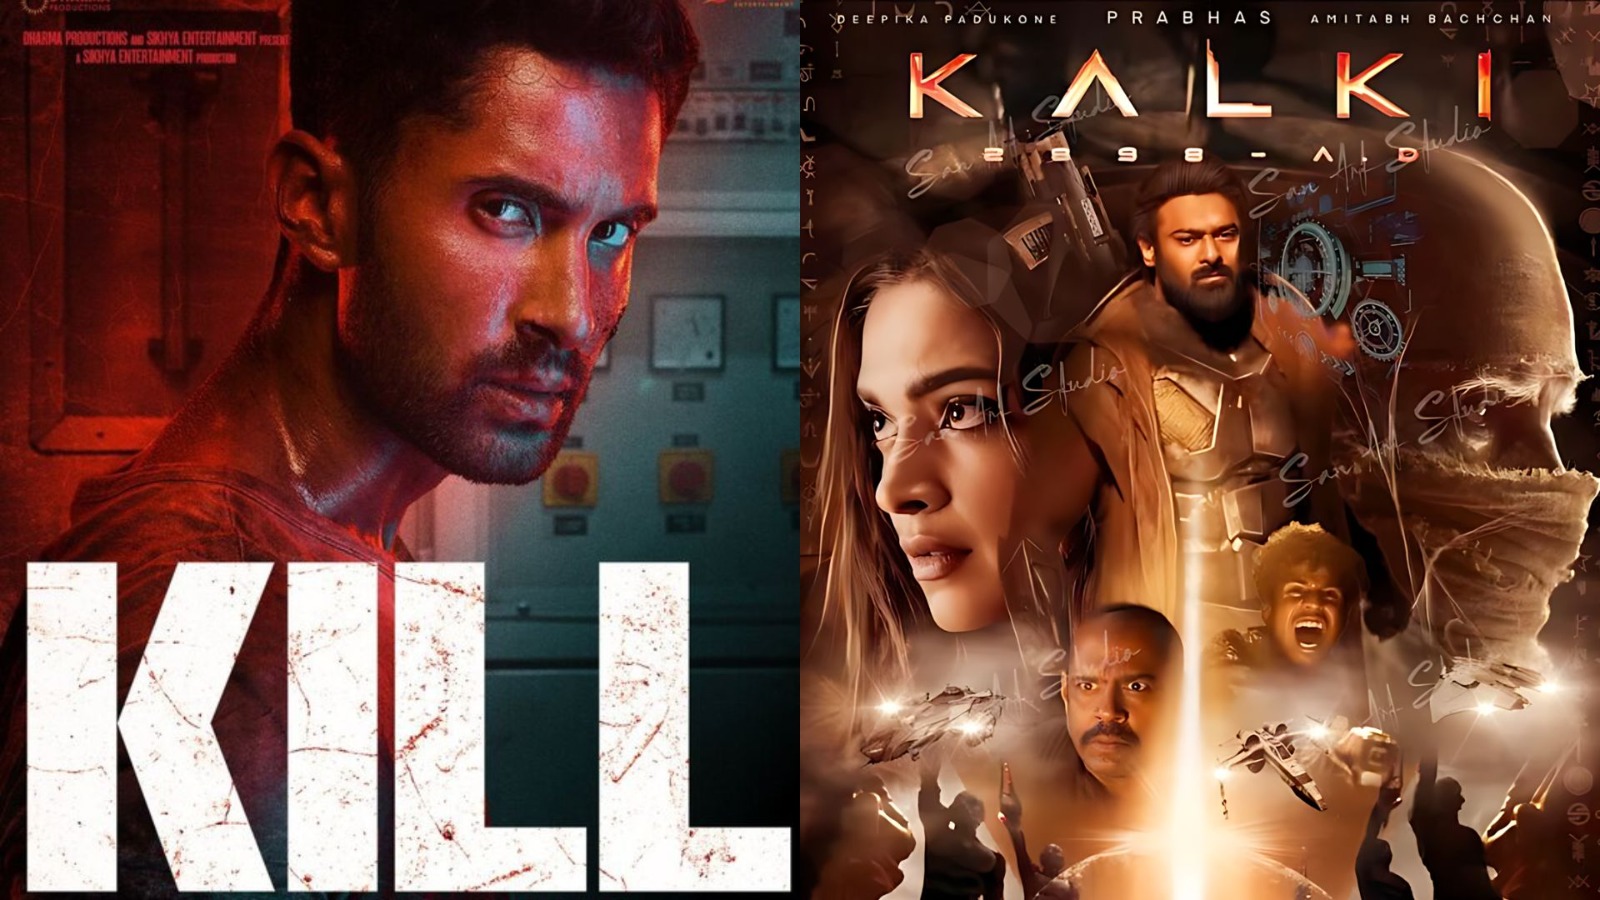 ‘Kill’ Box Office Prediction Day 1: Will Lakshya’s Film Be Able To Survive the ‘Kalki 2898 AD’ Storm? | Exclusive